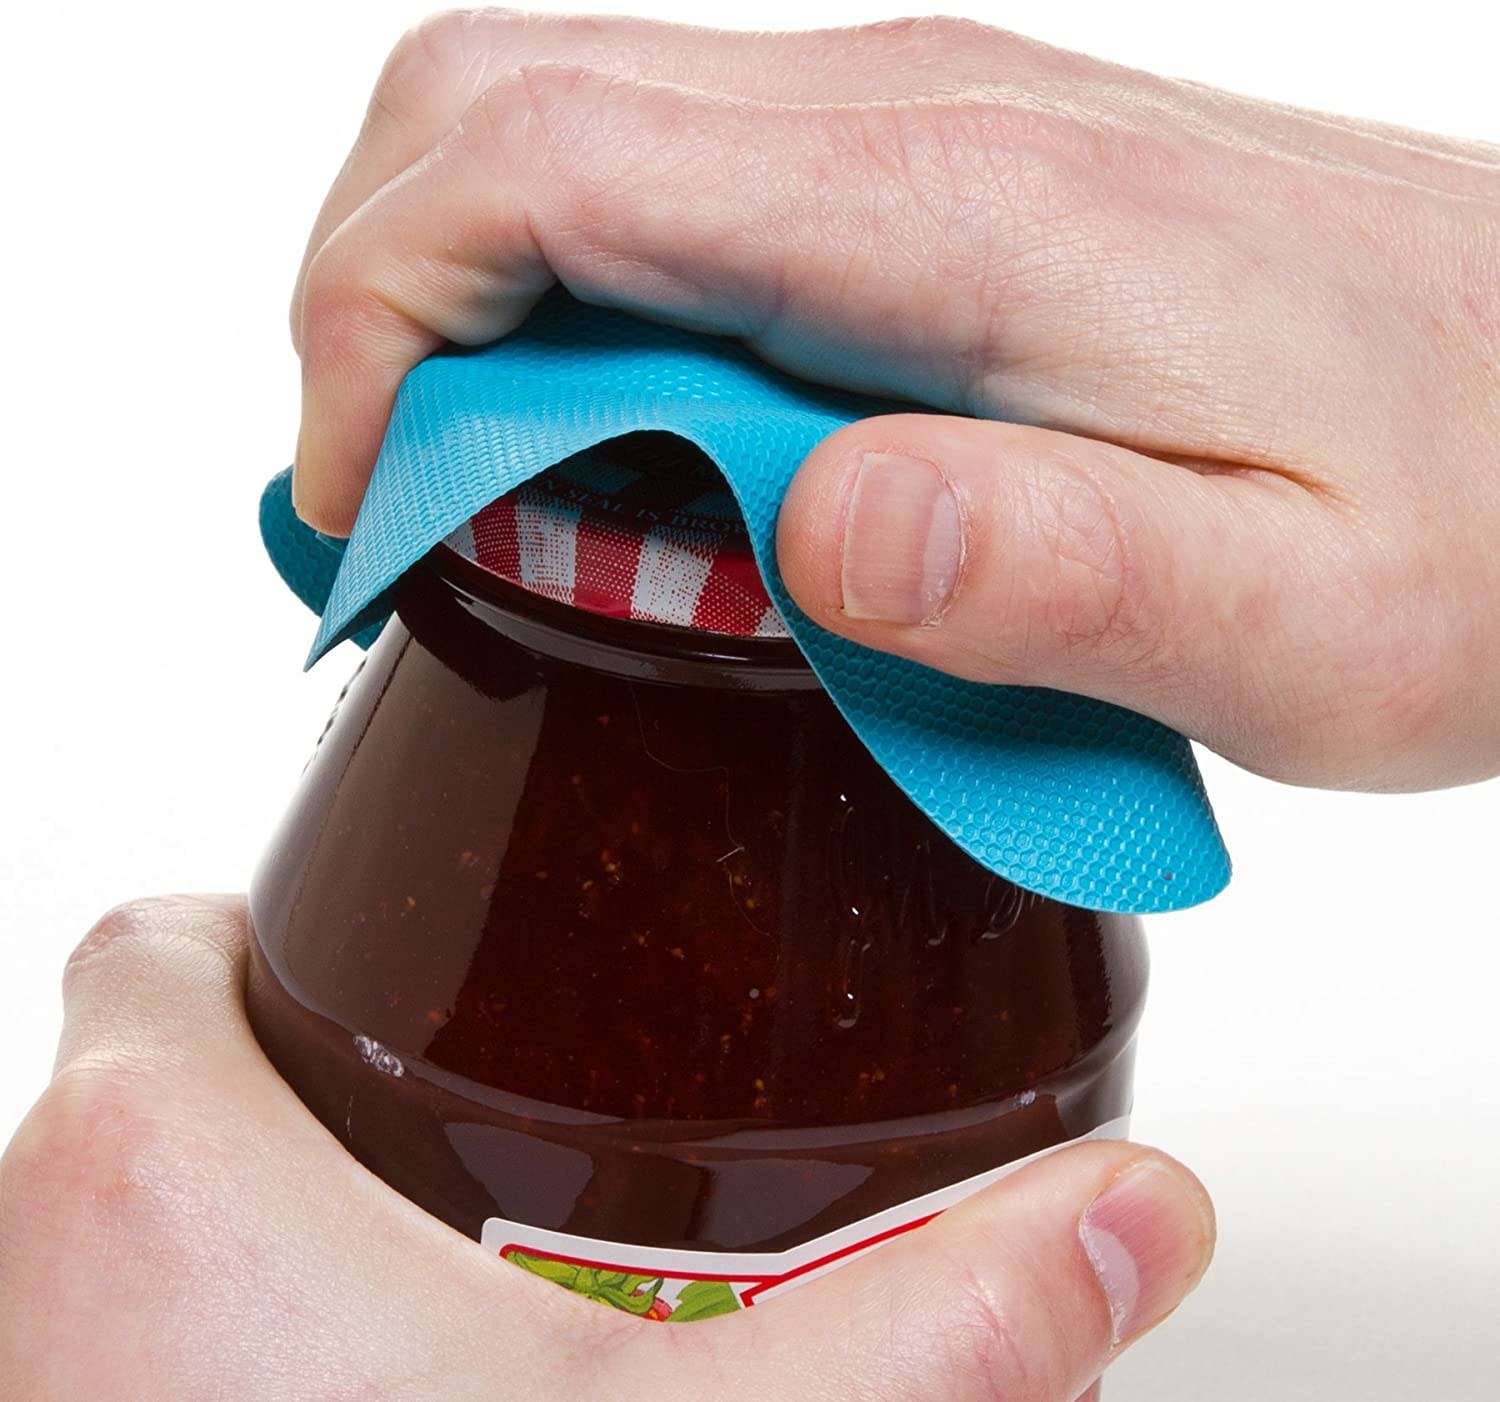 A person using a small rubber coaster to open a jar of jam